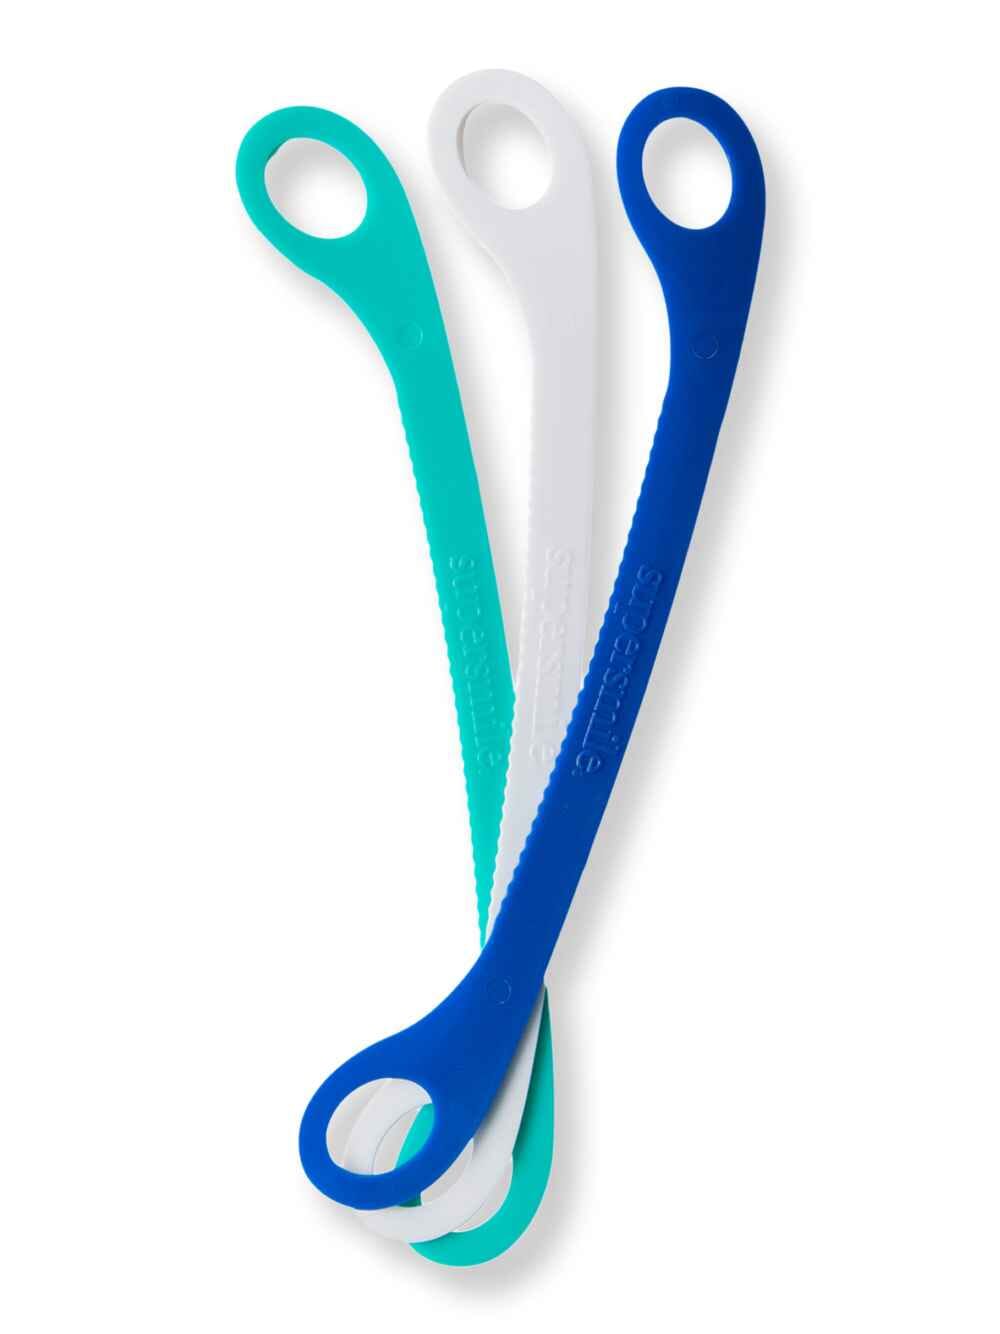 Supersmile Supersmile Ripple Edge Tongue Cleaner 3 Ct Electric & Manual Toothbrushes 